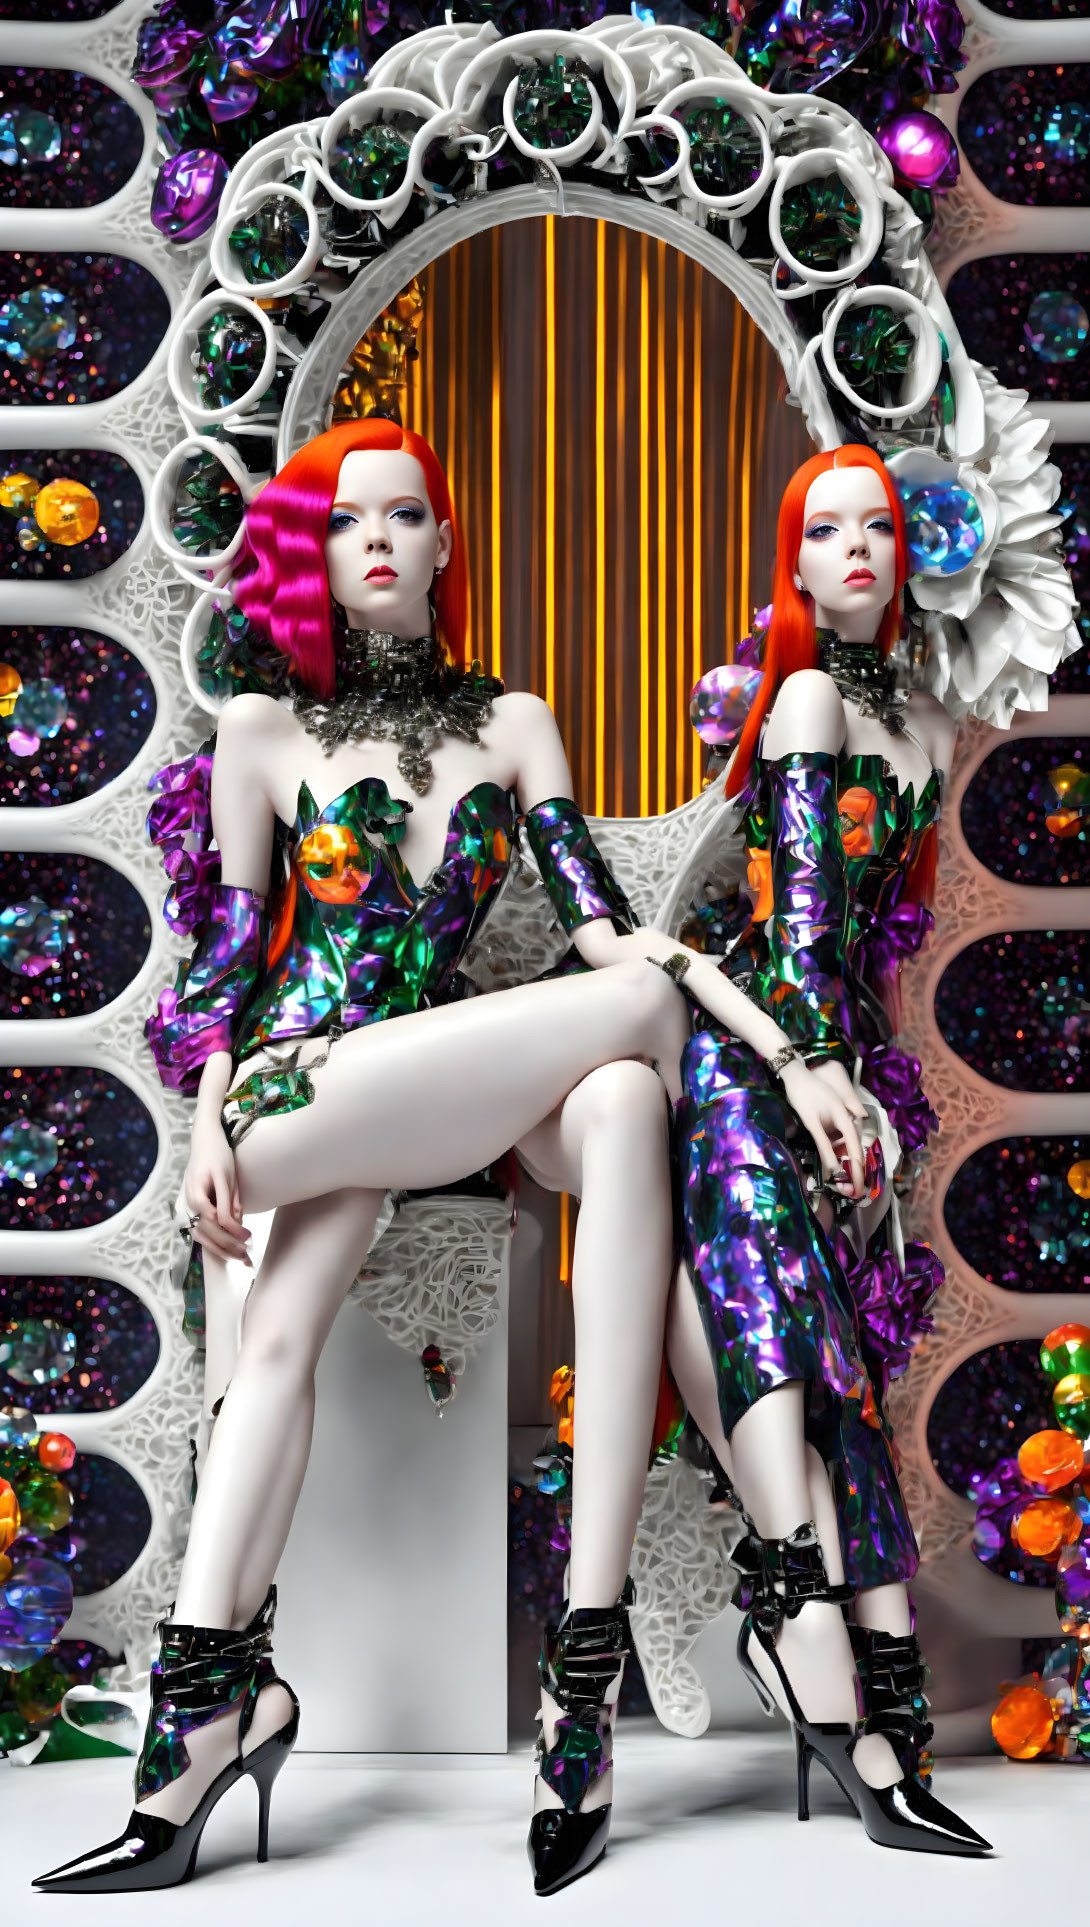 Vibrant red and pink-haired mannequin models in colorful outfits by ornate mirror